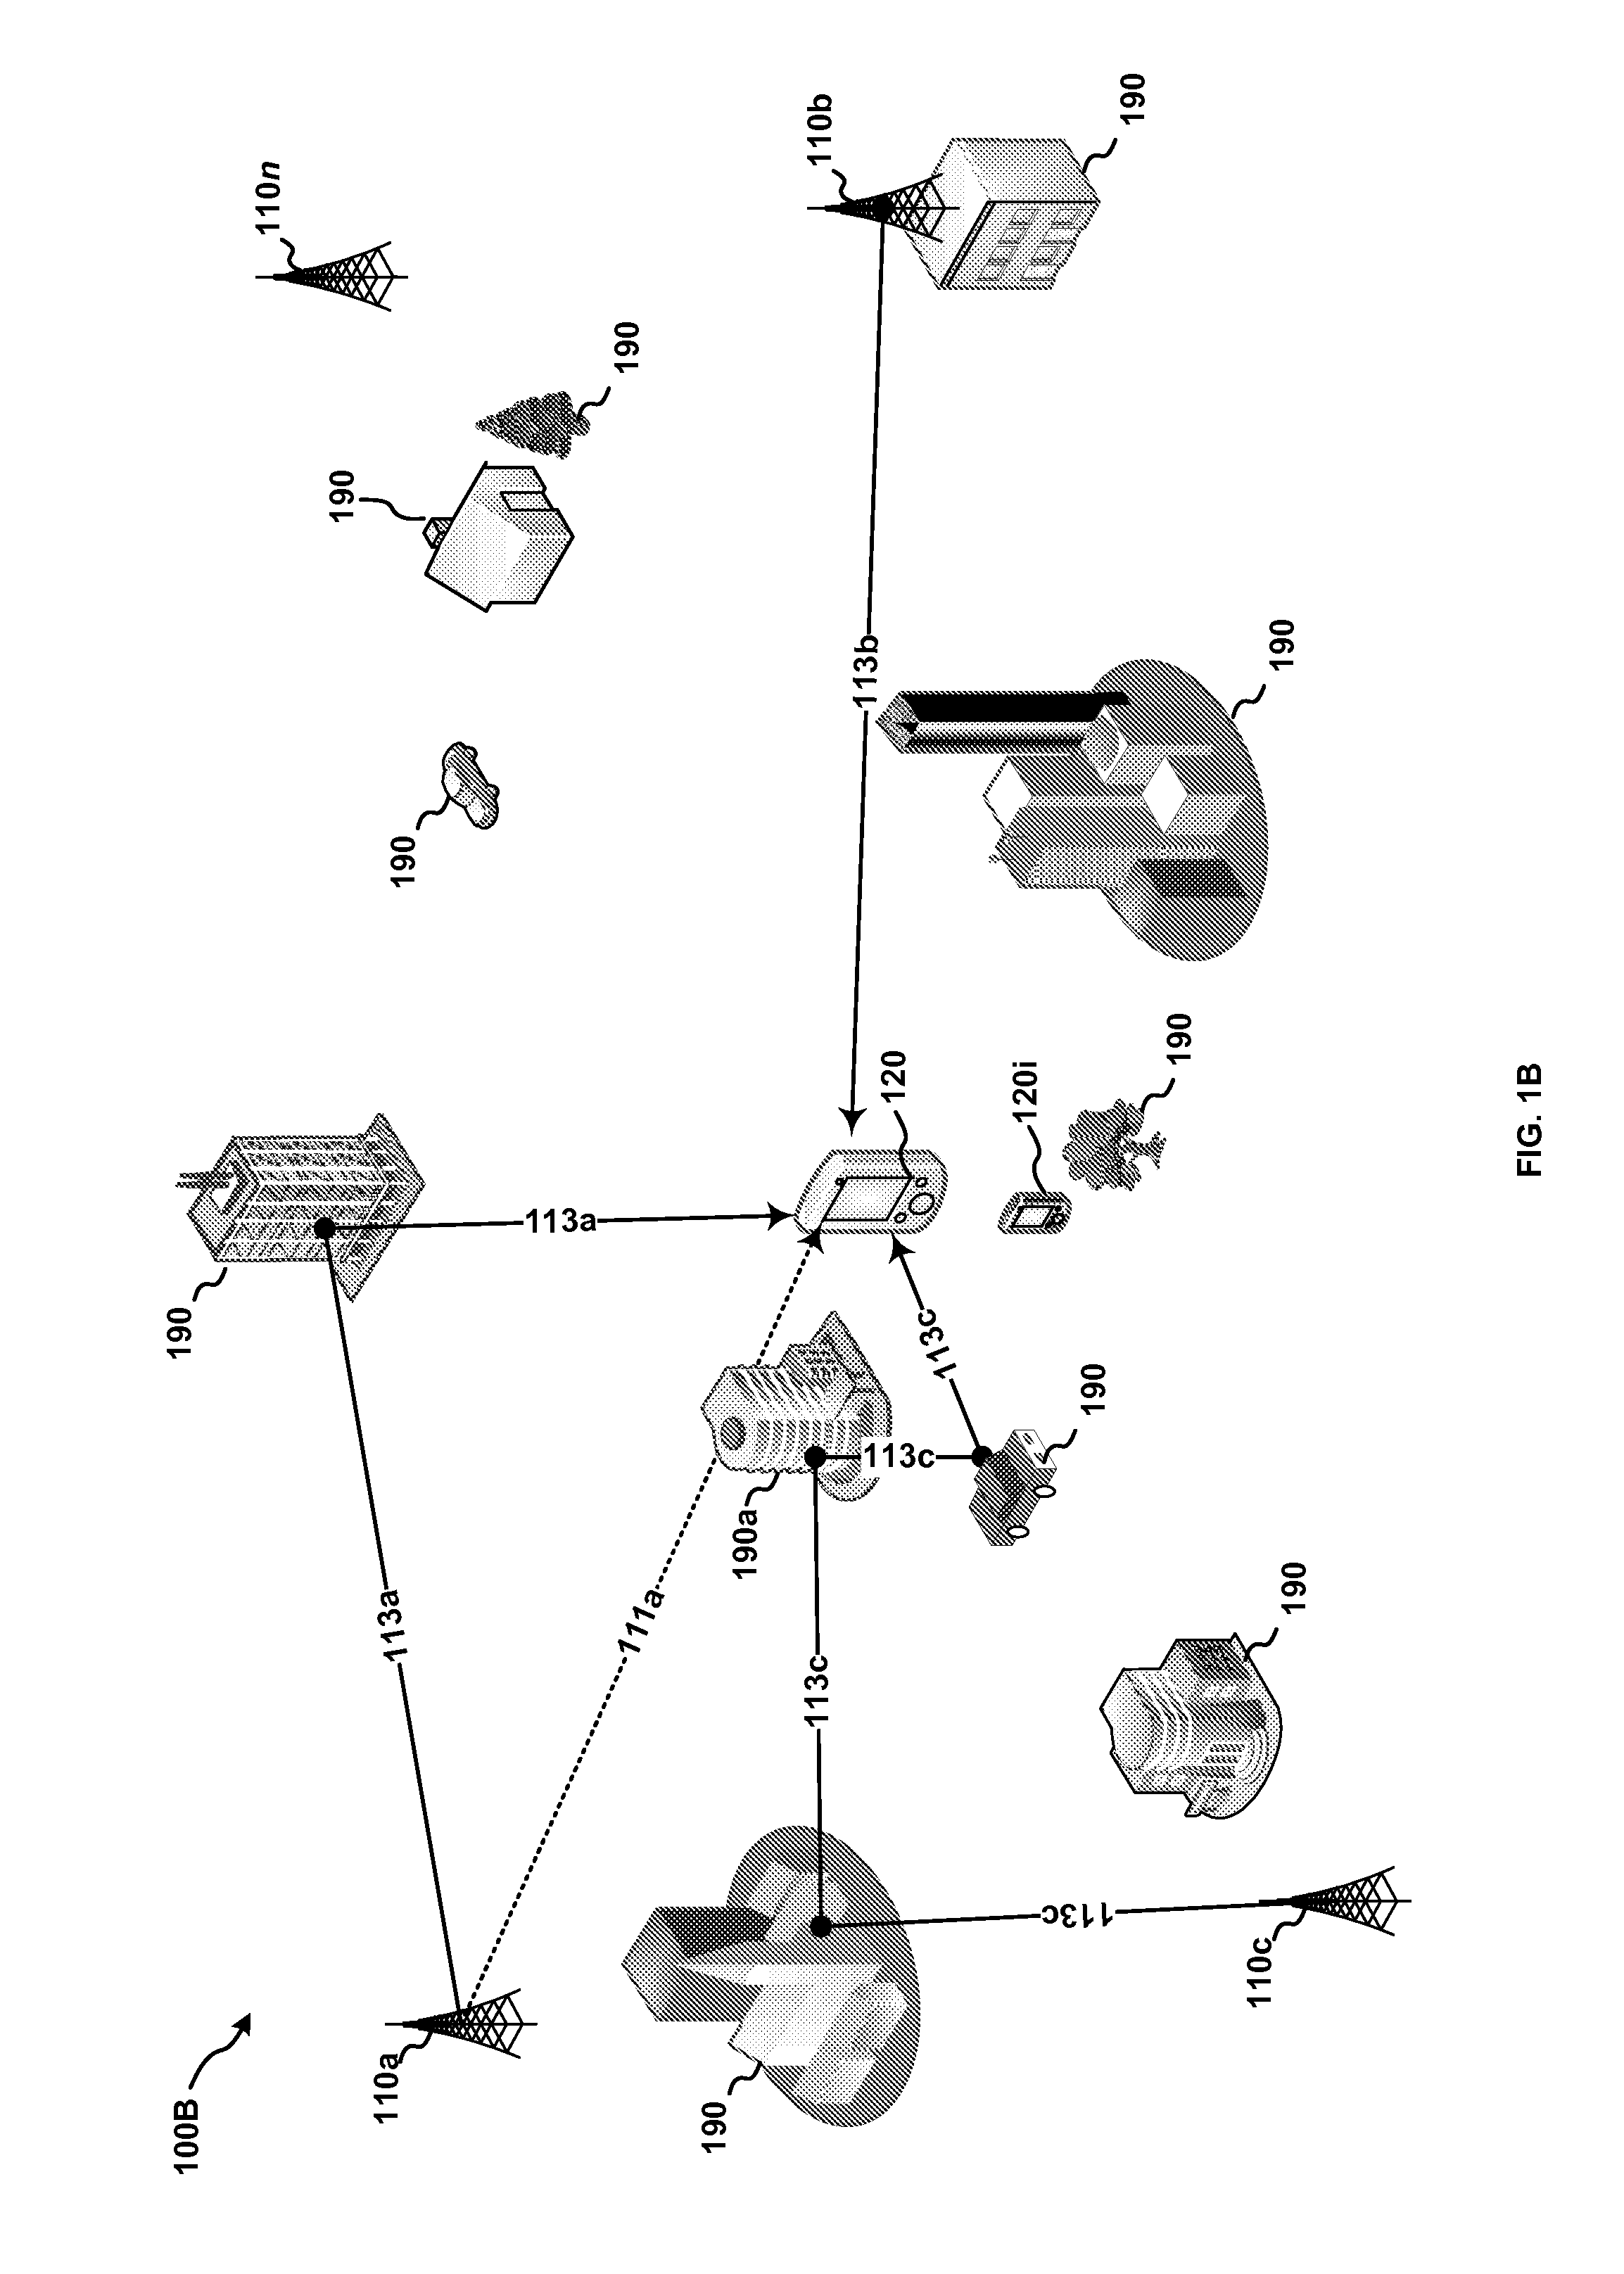 Systems and methods configured to estimate receiver position using timing data associated with reference locations in three-dimensional space